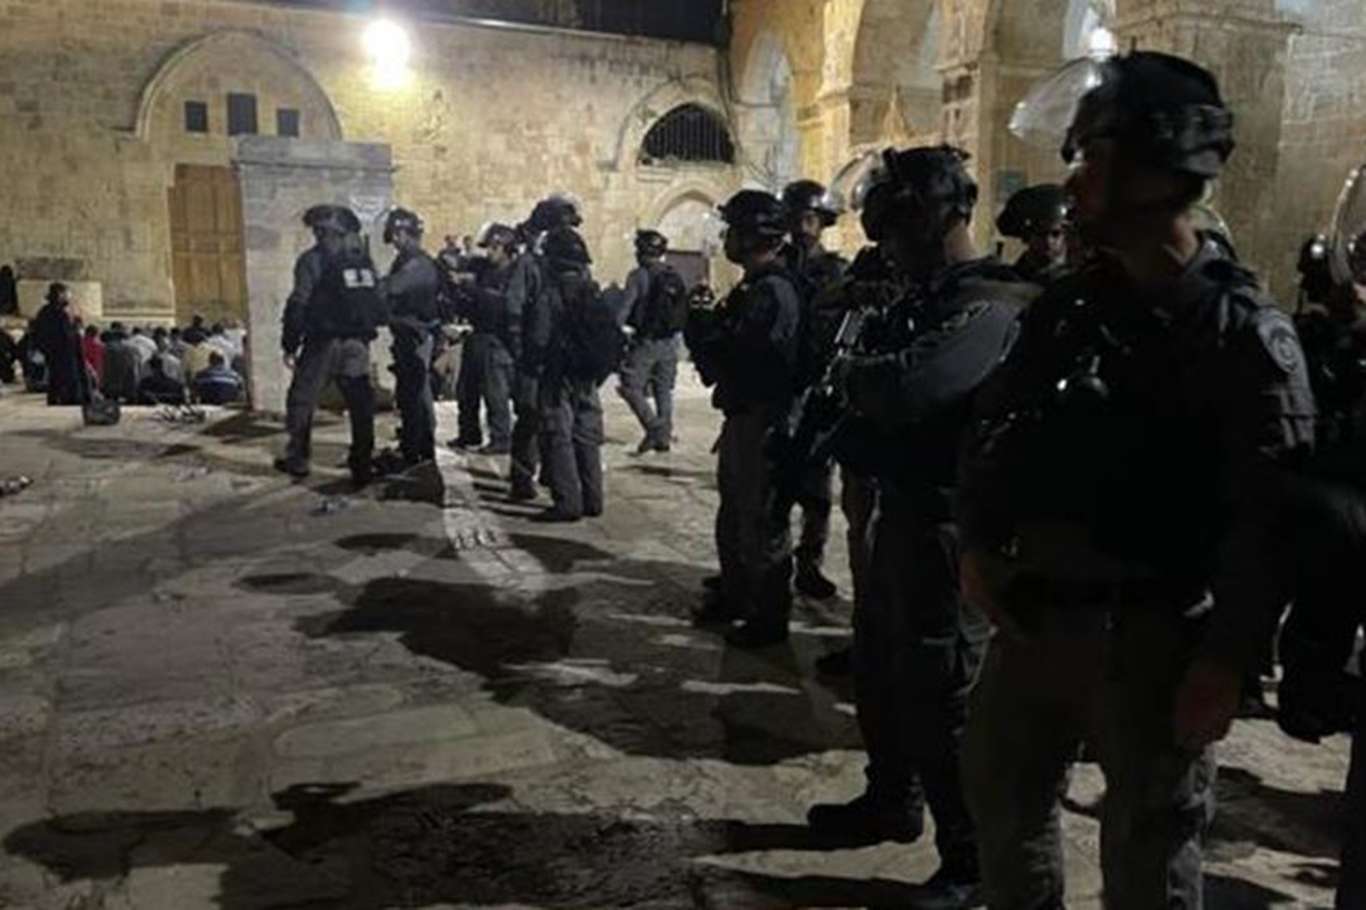 Hamas: Zionist occupation is carrying out organized crime against worshipers at Al Aqsa Mosque